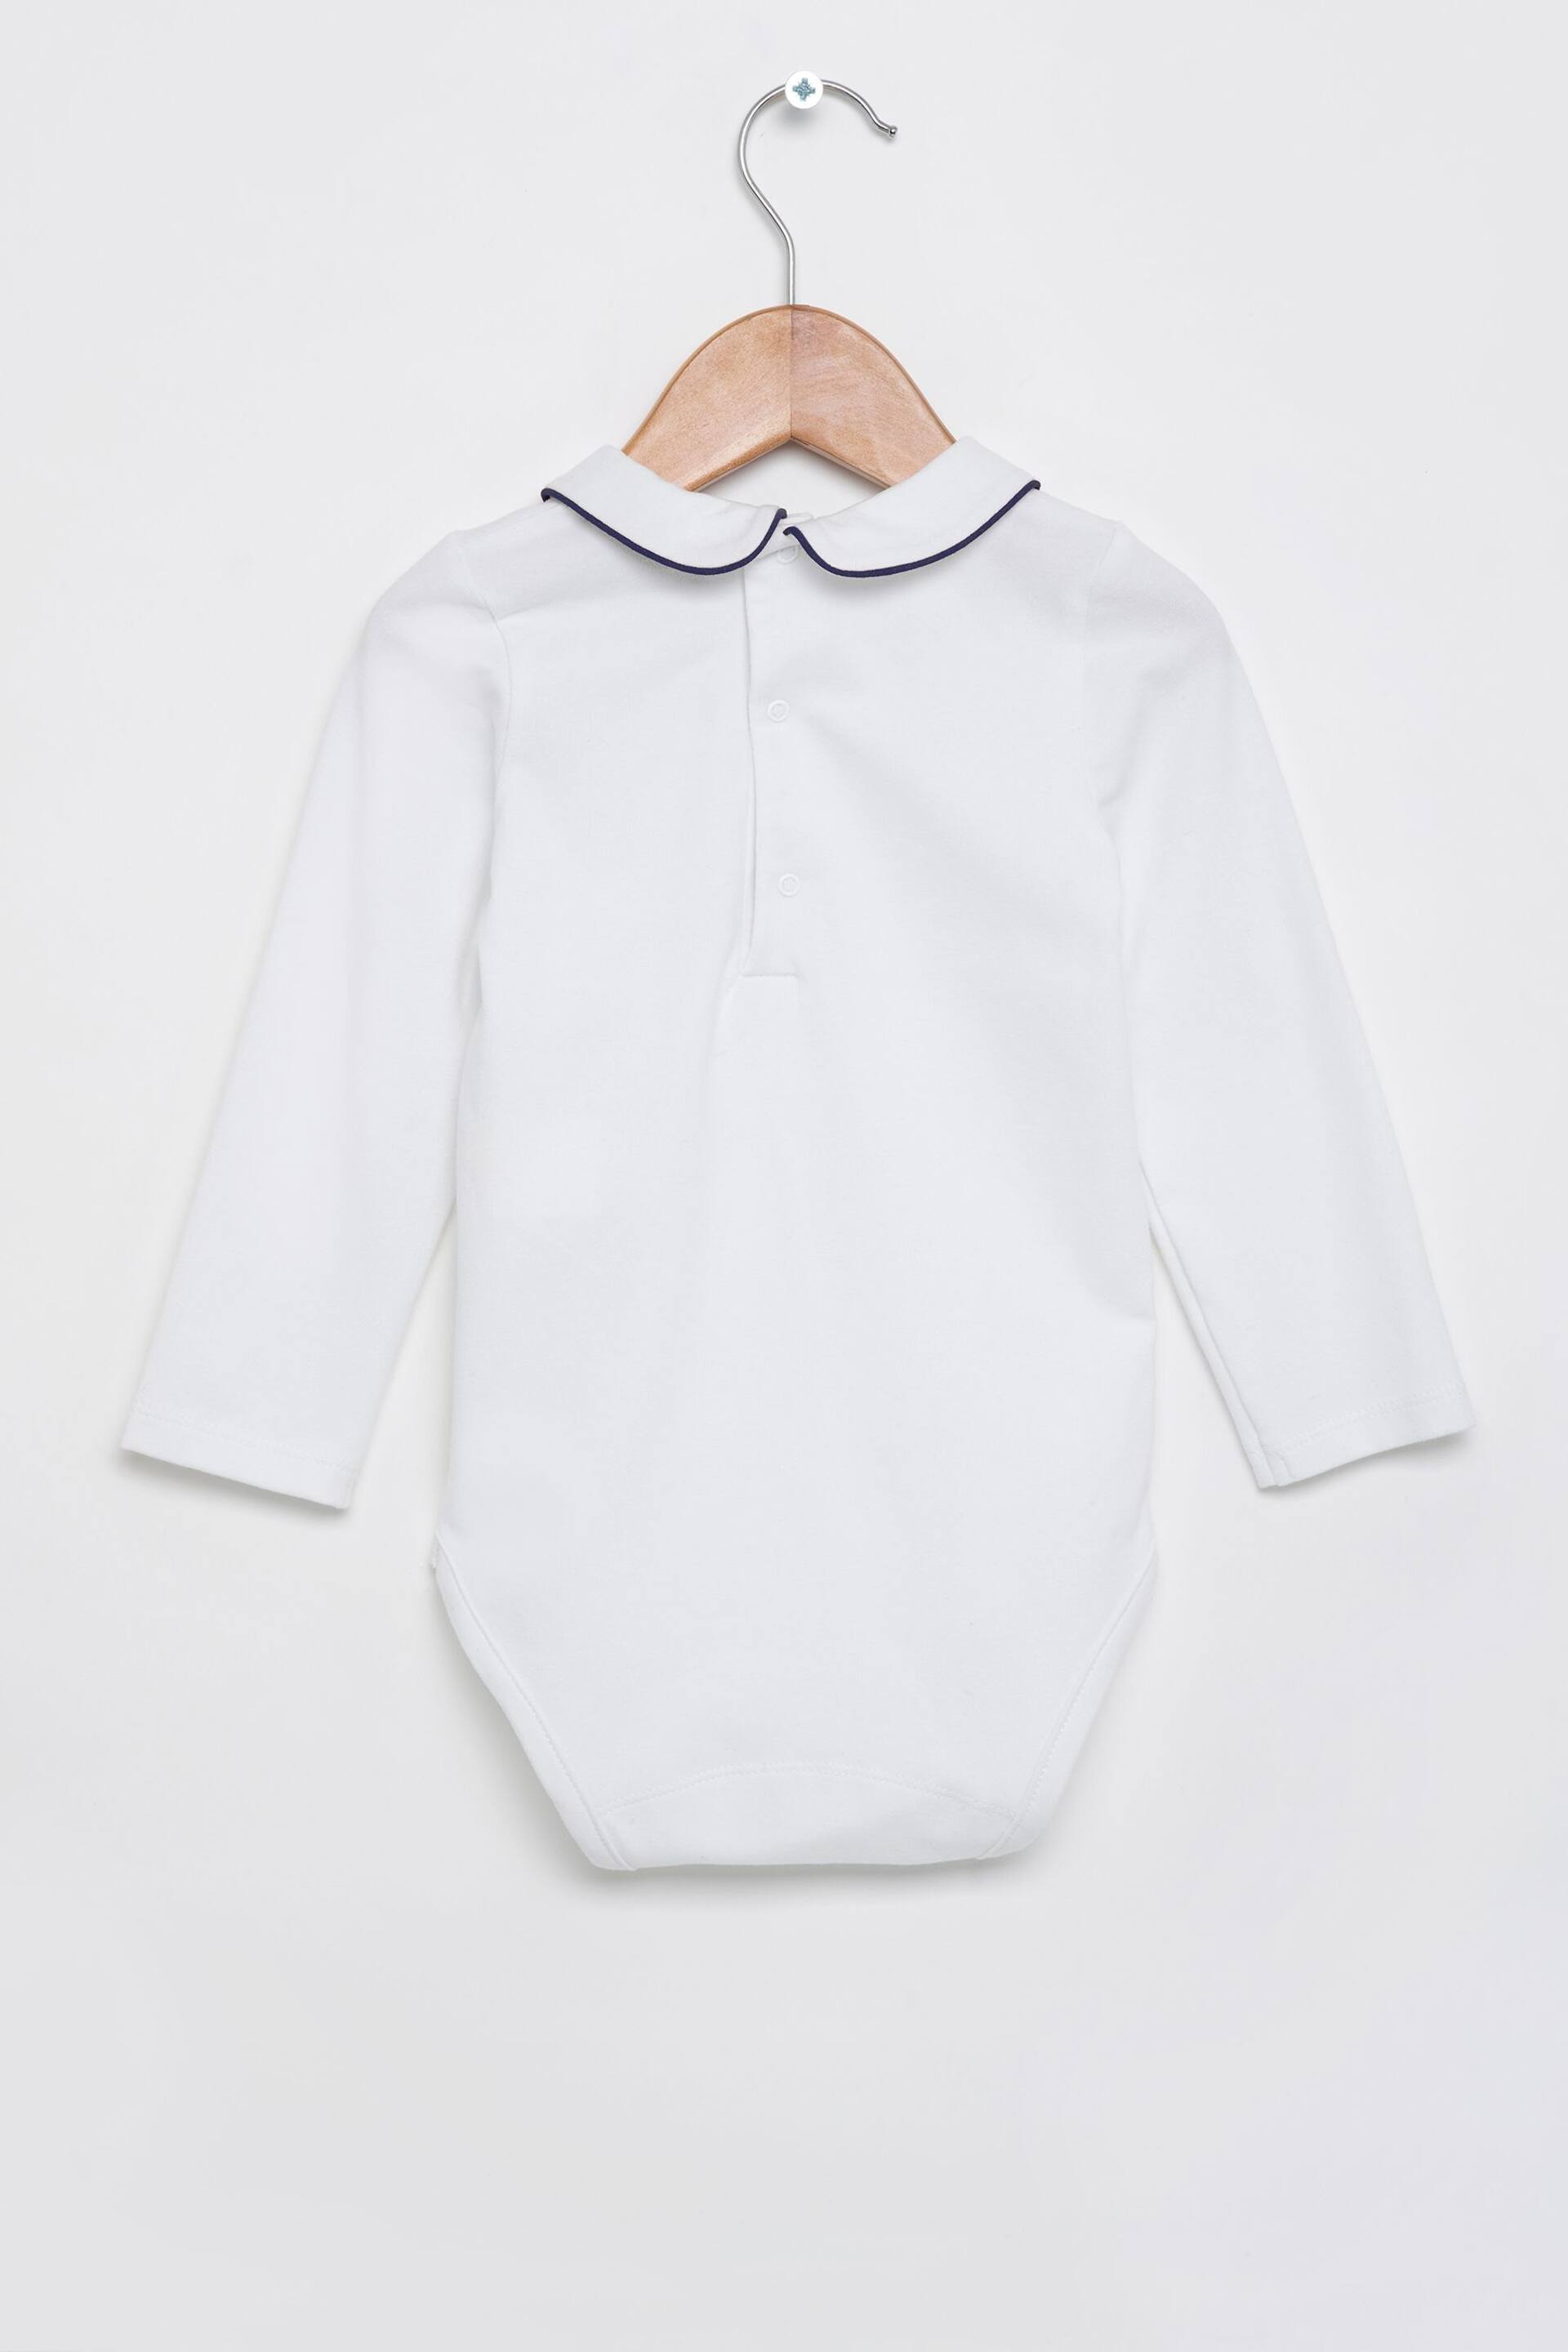 Trotters London Long Sleeve White Milo Piped Body - Image 2 of 3